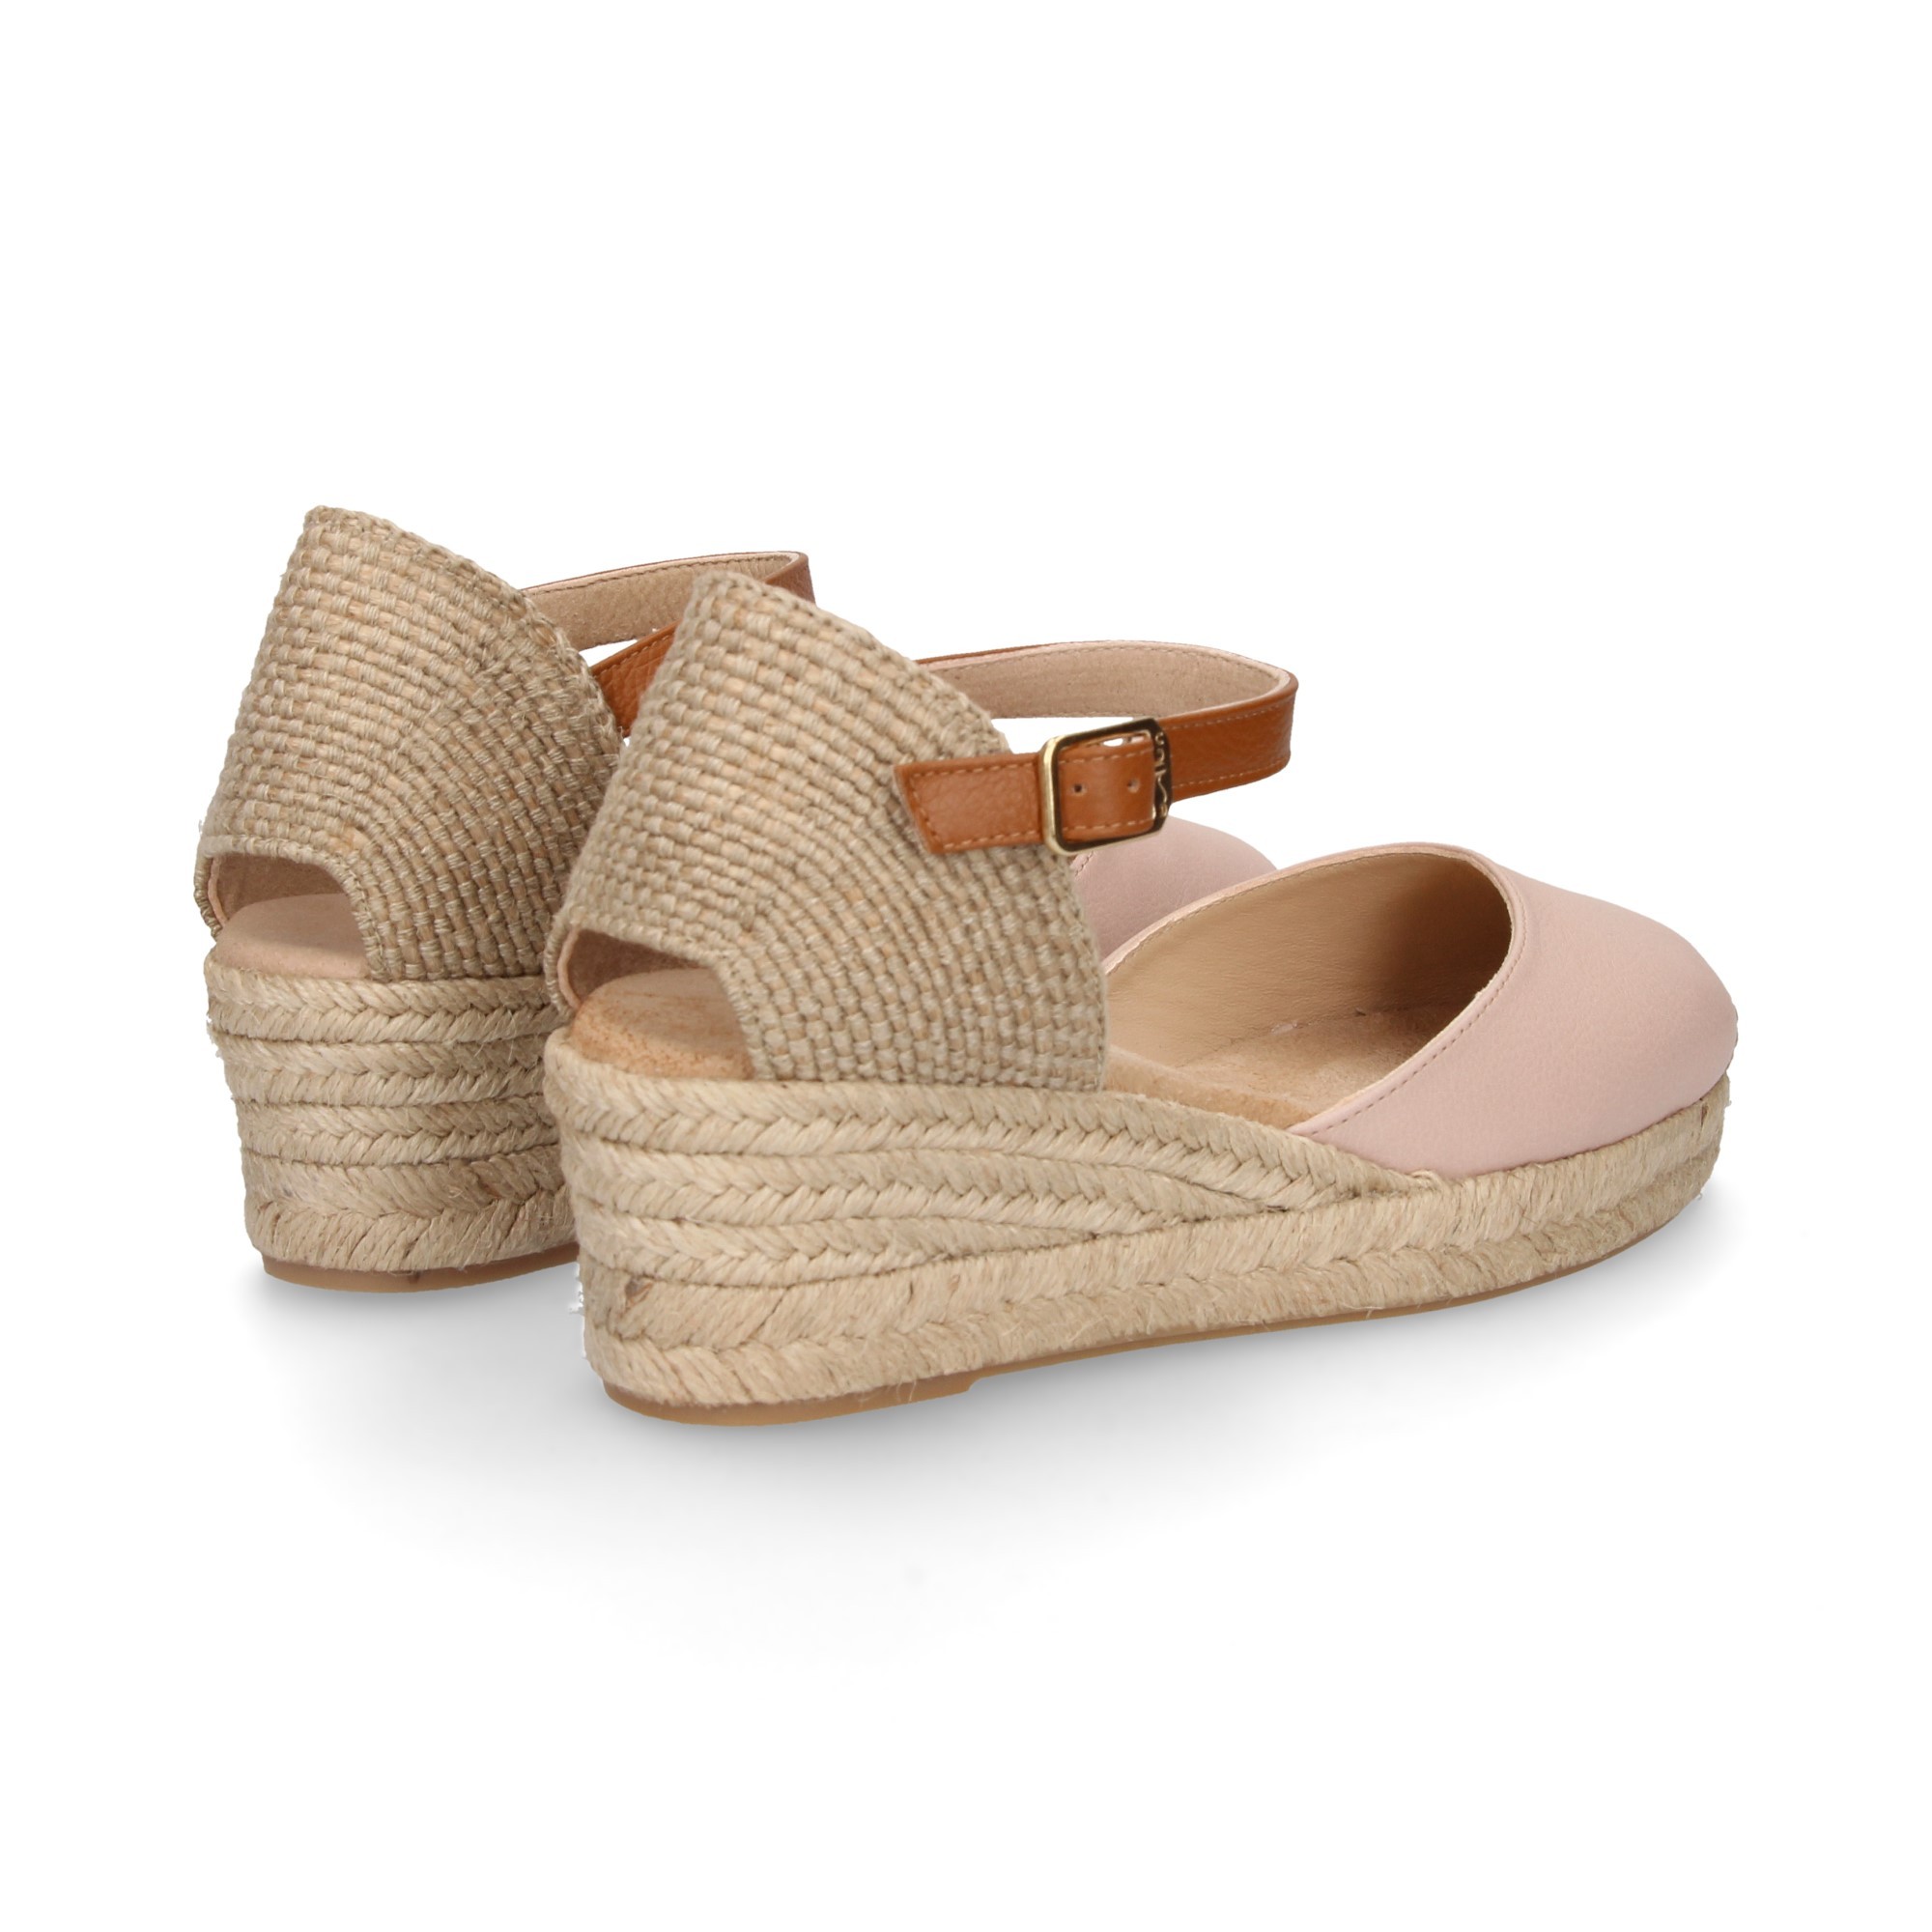 ESPADRILLE WEDGE ESPADRILLE ESPADRILLE LOW PINK LEATHER